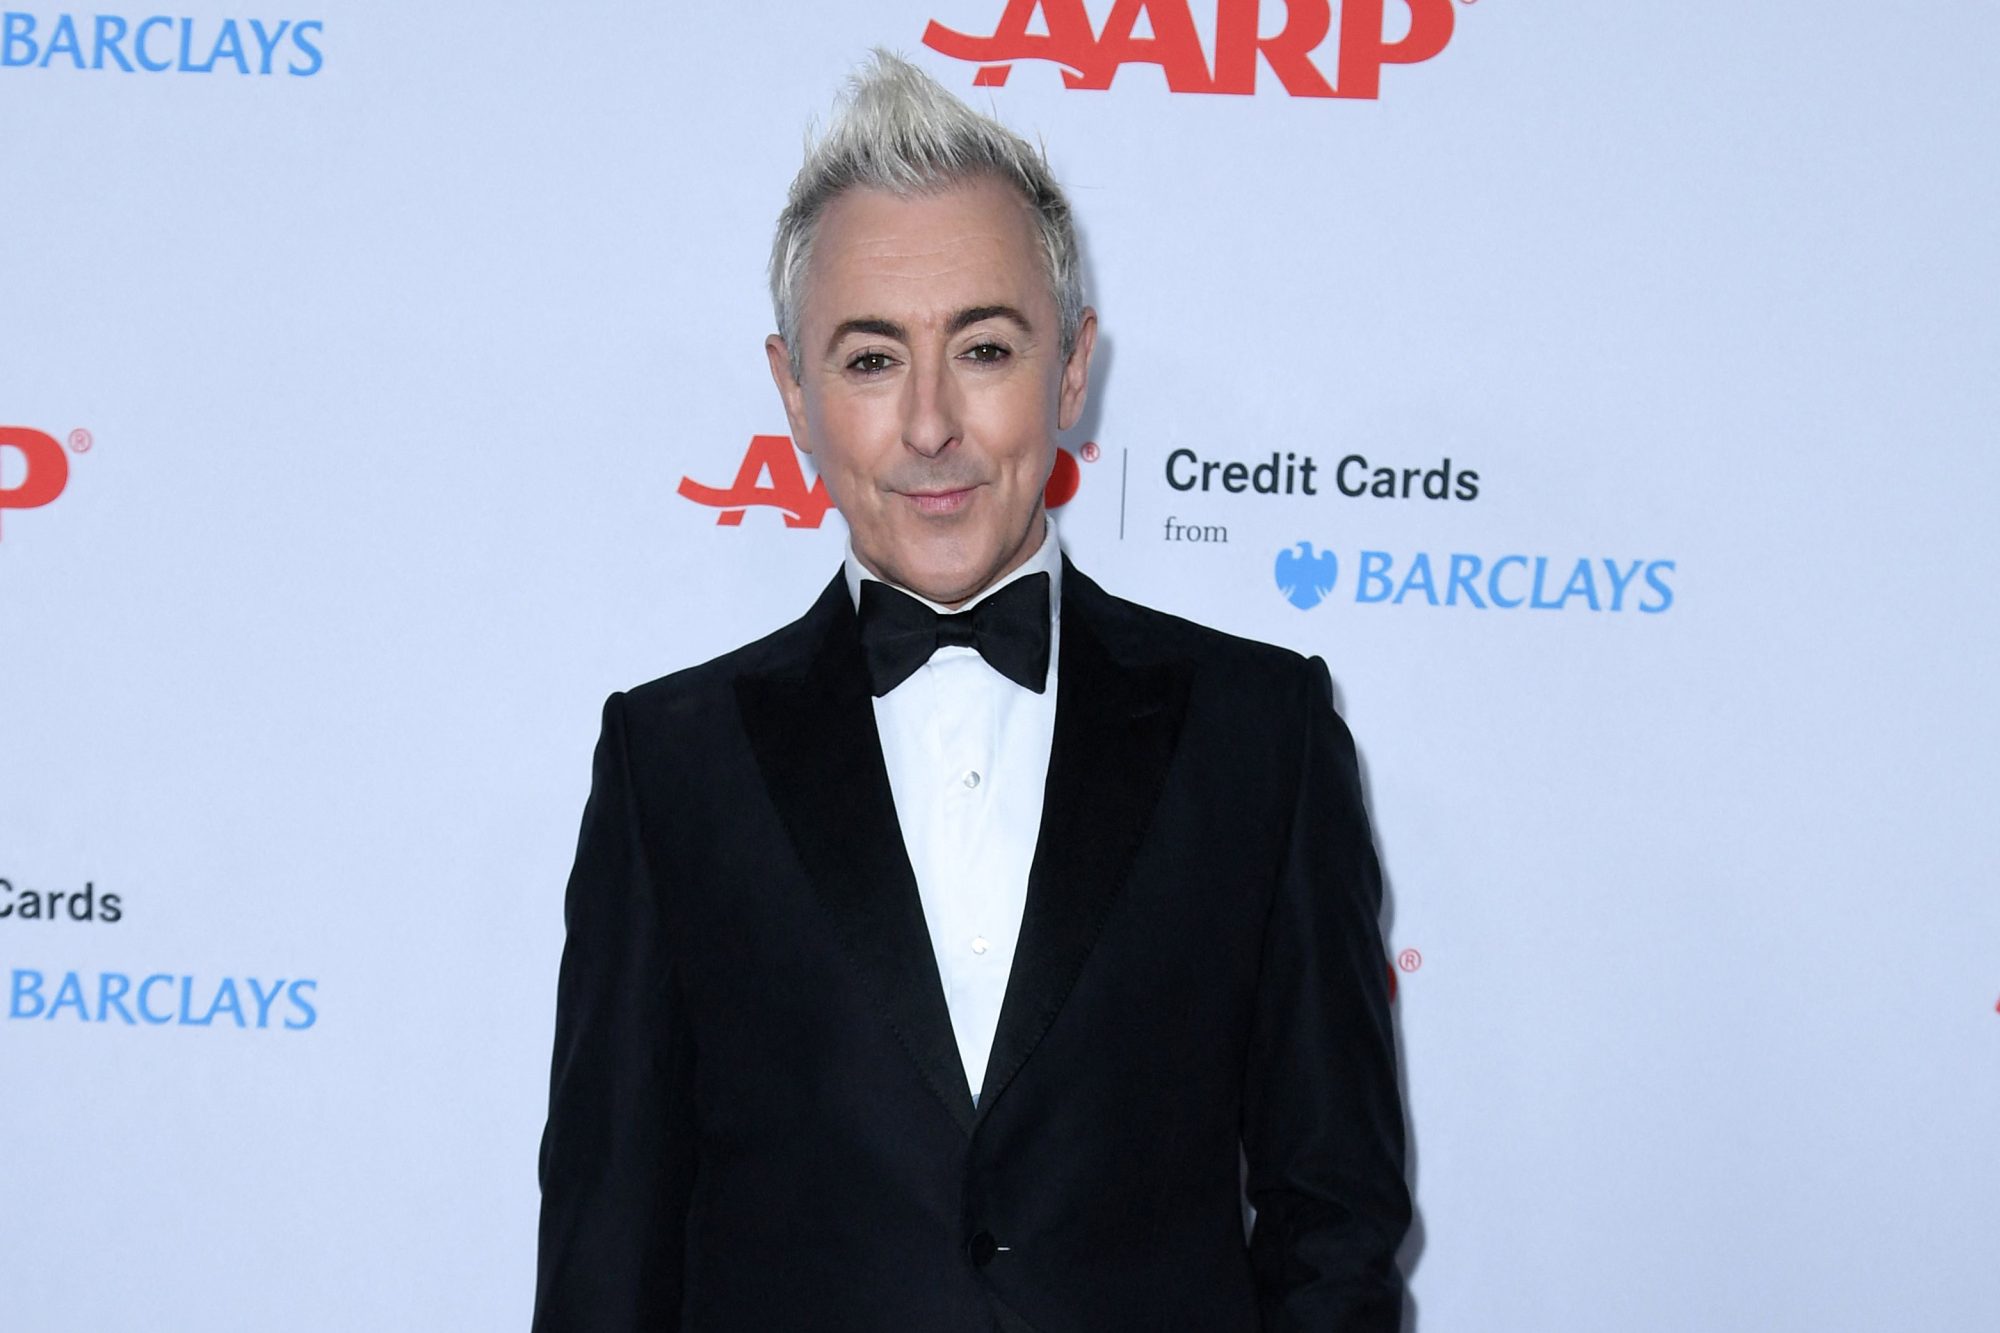 Actor Alan Cumming attends AARP The Magazine's 21st annual movies for grownups awards at the Beverly Wilshire, in Beverly Hills, California, January 28, 2023. (Photo by Valerie MACON / AFP) (Photo by VALERIE MACON/AFP via Getty Images)